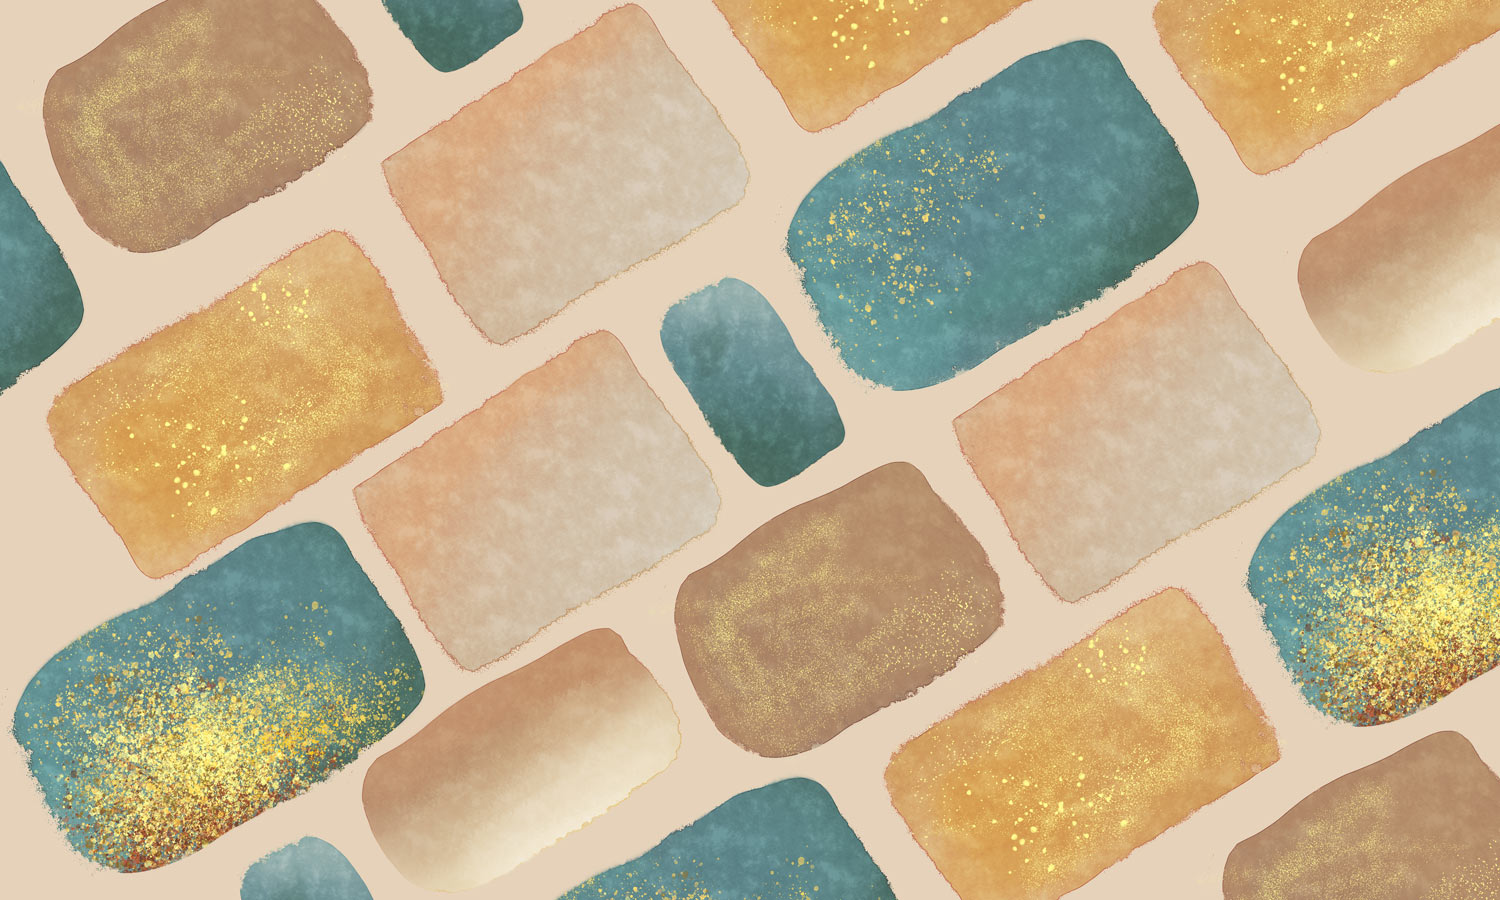 Wallpaper mural with multi-colored gold foil abstract blocks